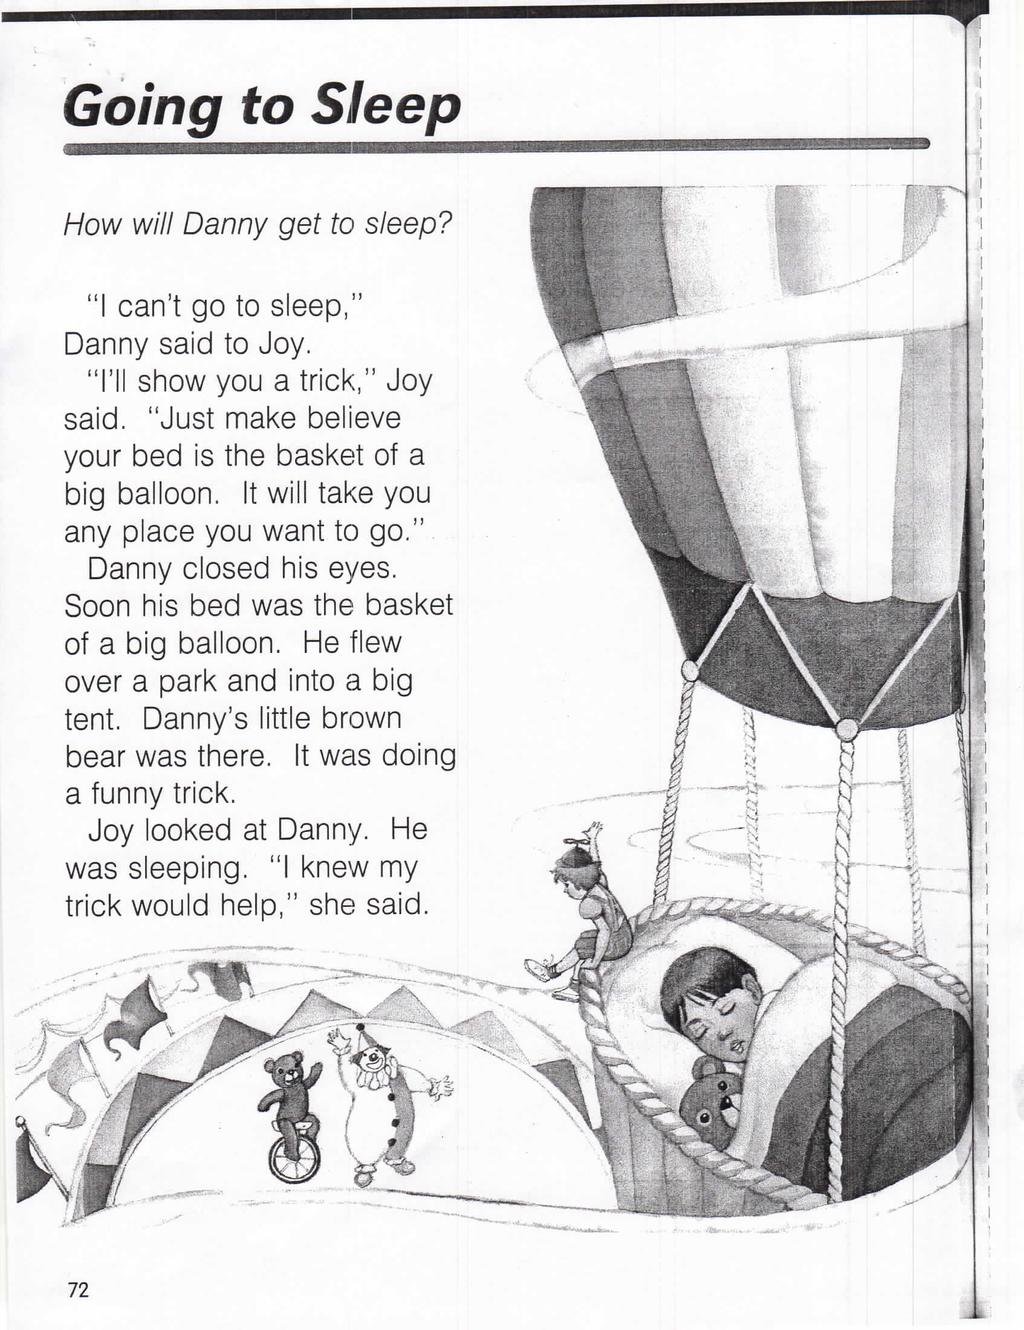 Going to Sleep How will Danny get to sleep? "I can't go to sleep," Danny said to Joy. 'Til show you a trick," Joy said. "Just make believe your bed is the basket of a Dig balloon.